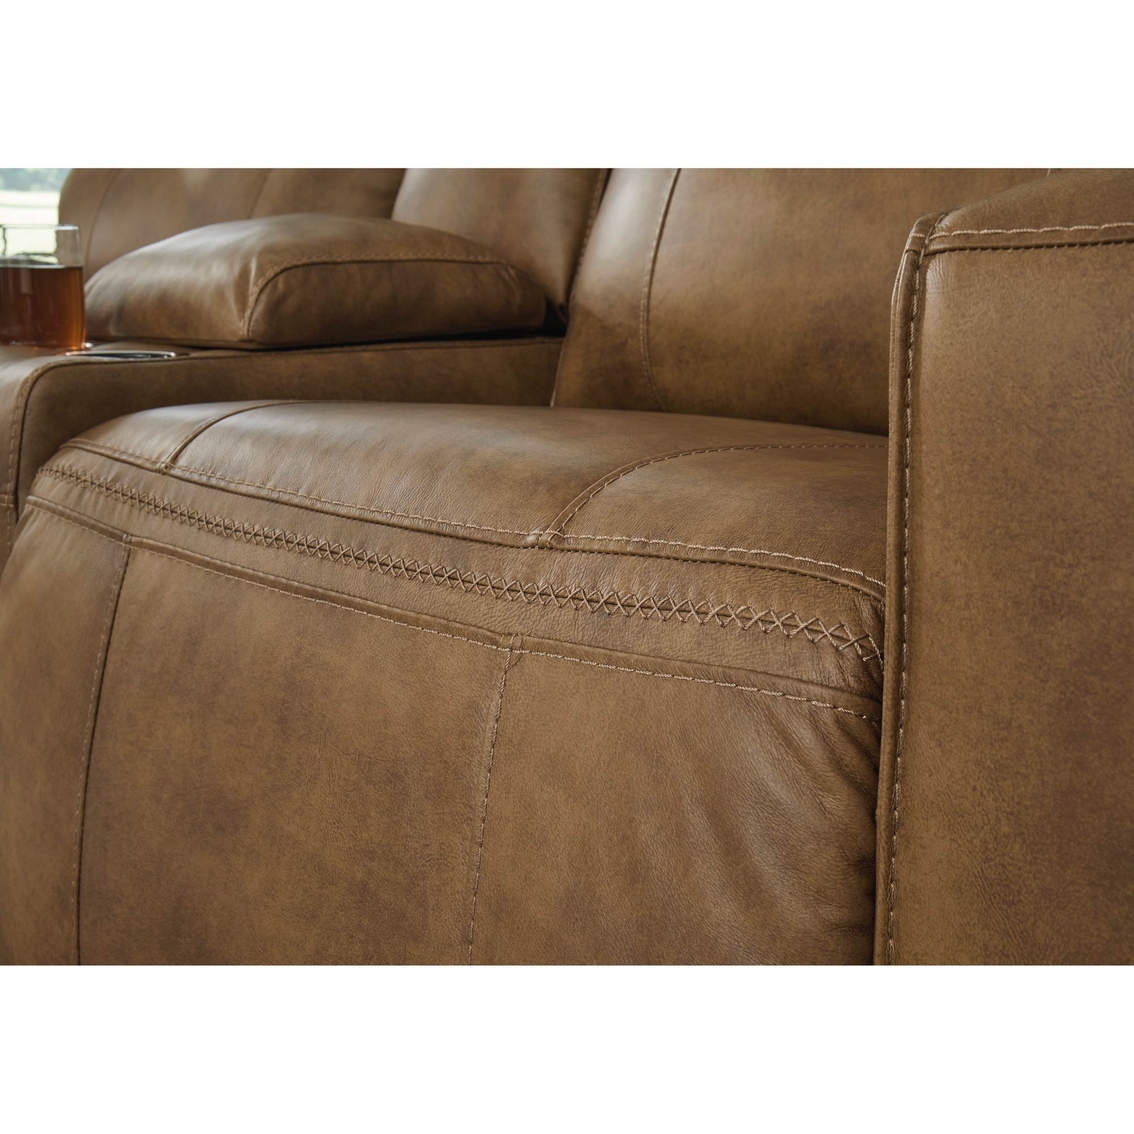 Signature Design by Ashley Game Plan Power Reclining Sofa - Image 7 of 8